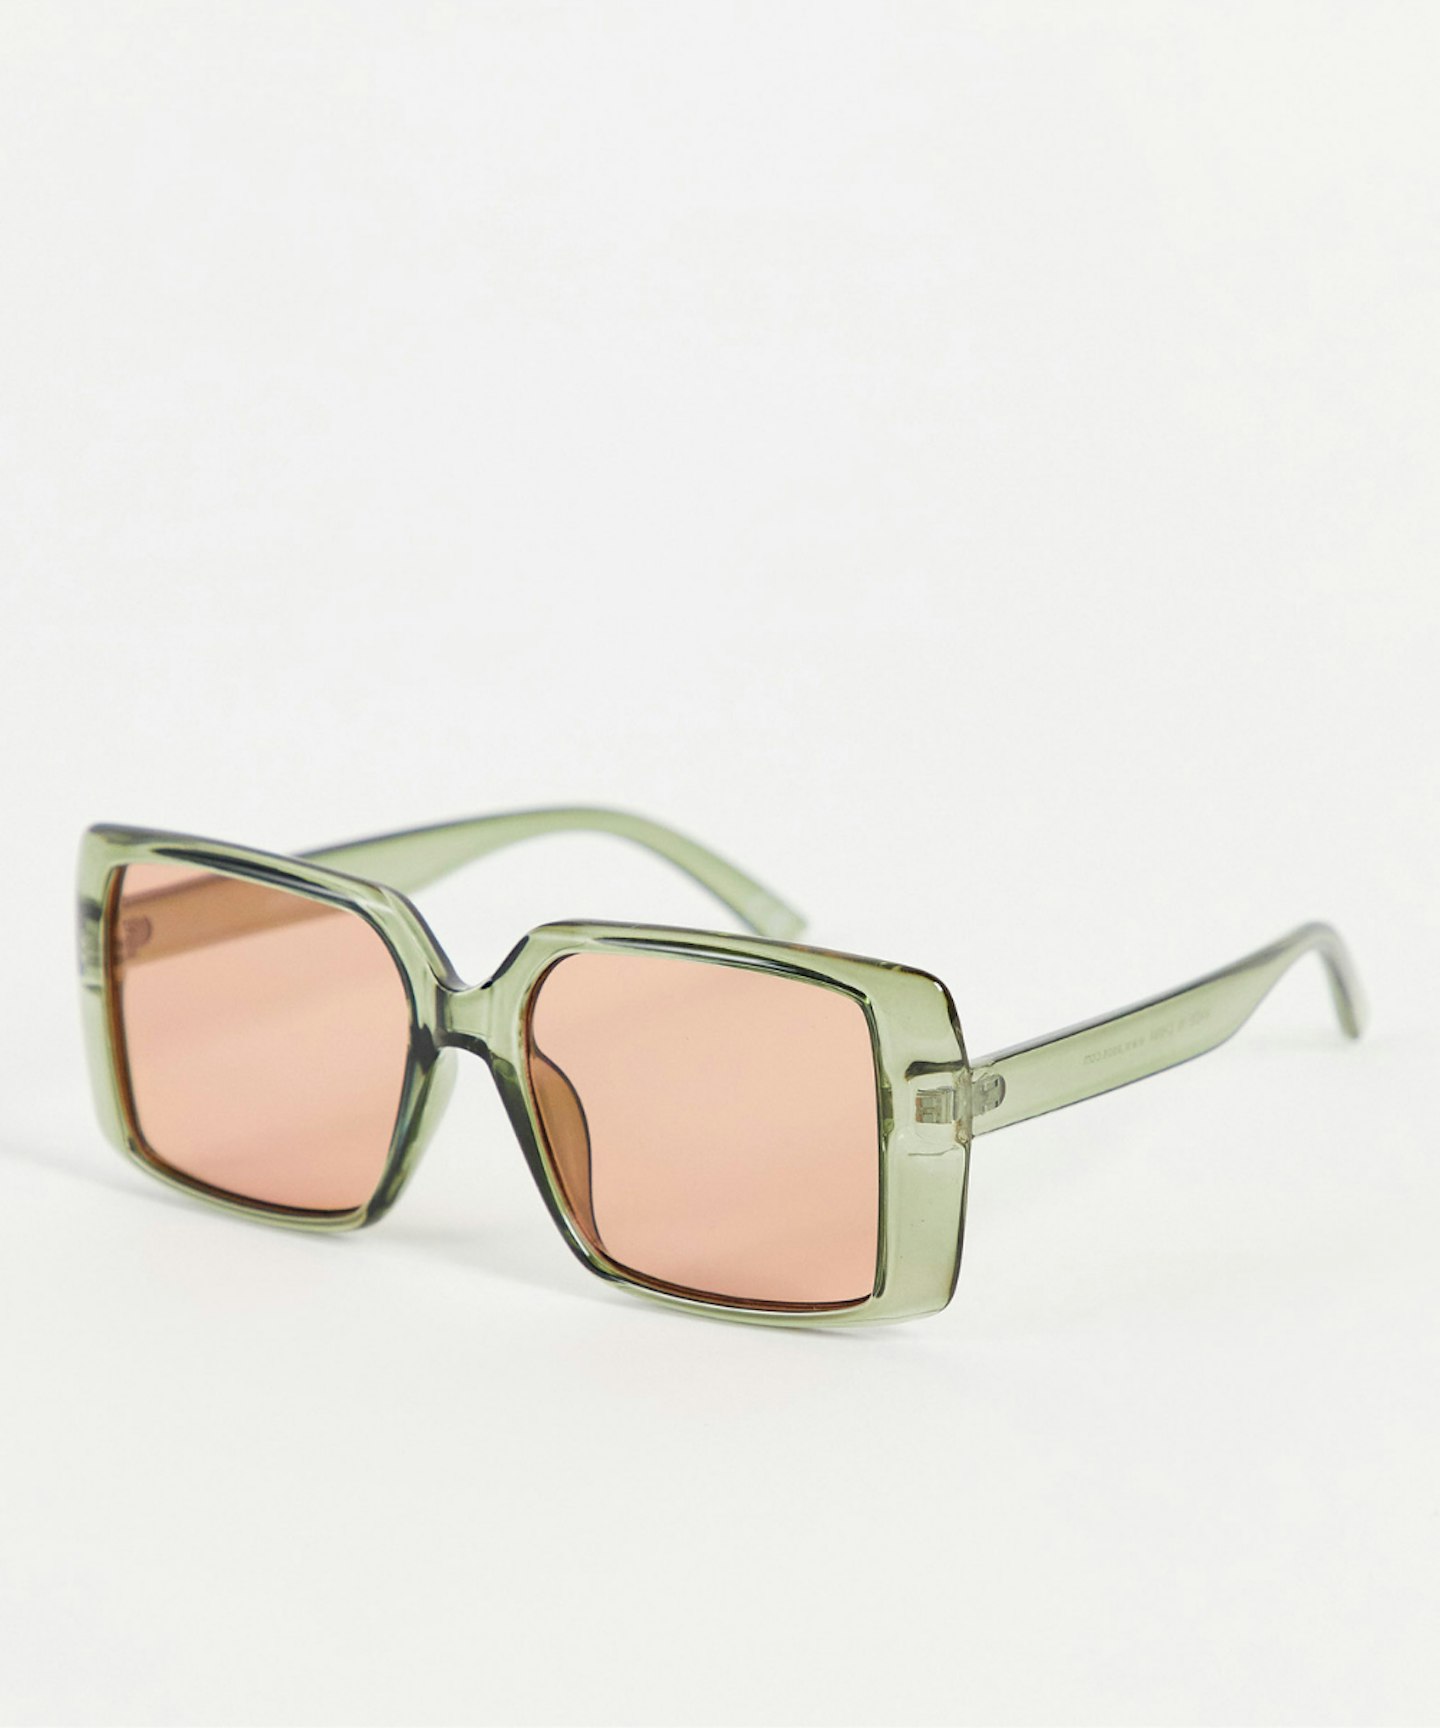 ASOS DESIGN Recycled Frame 70s Sunglasses with Orange Lens in Green